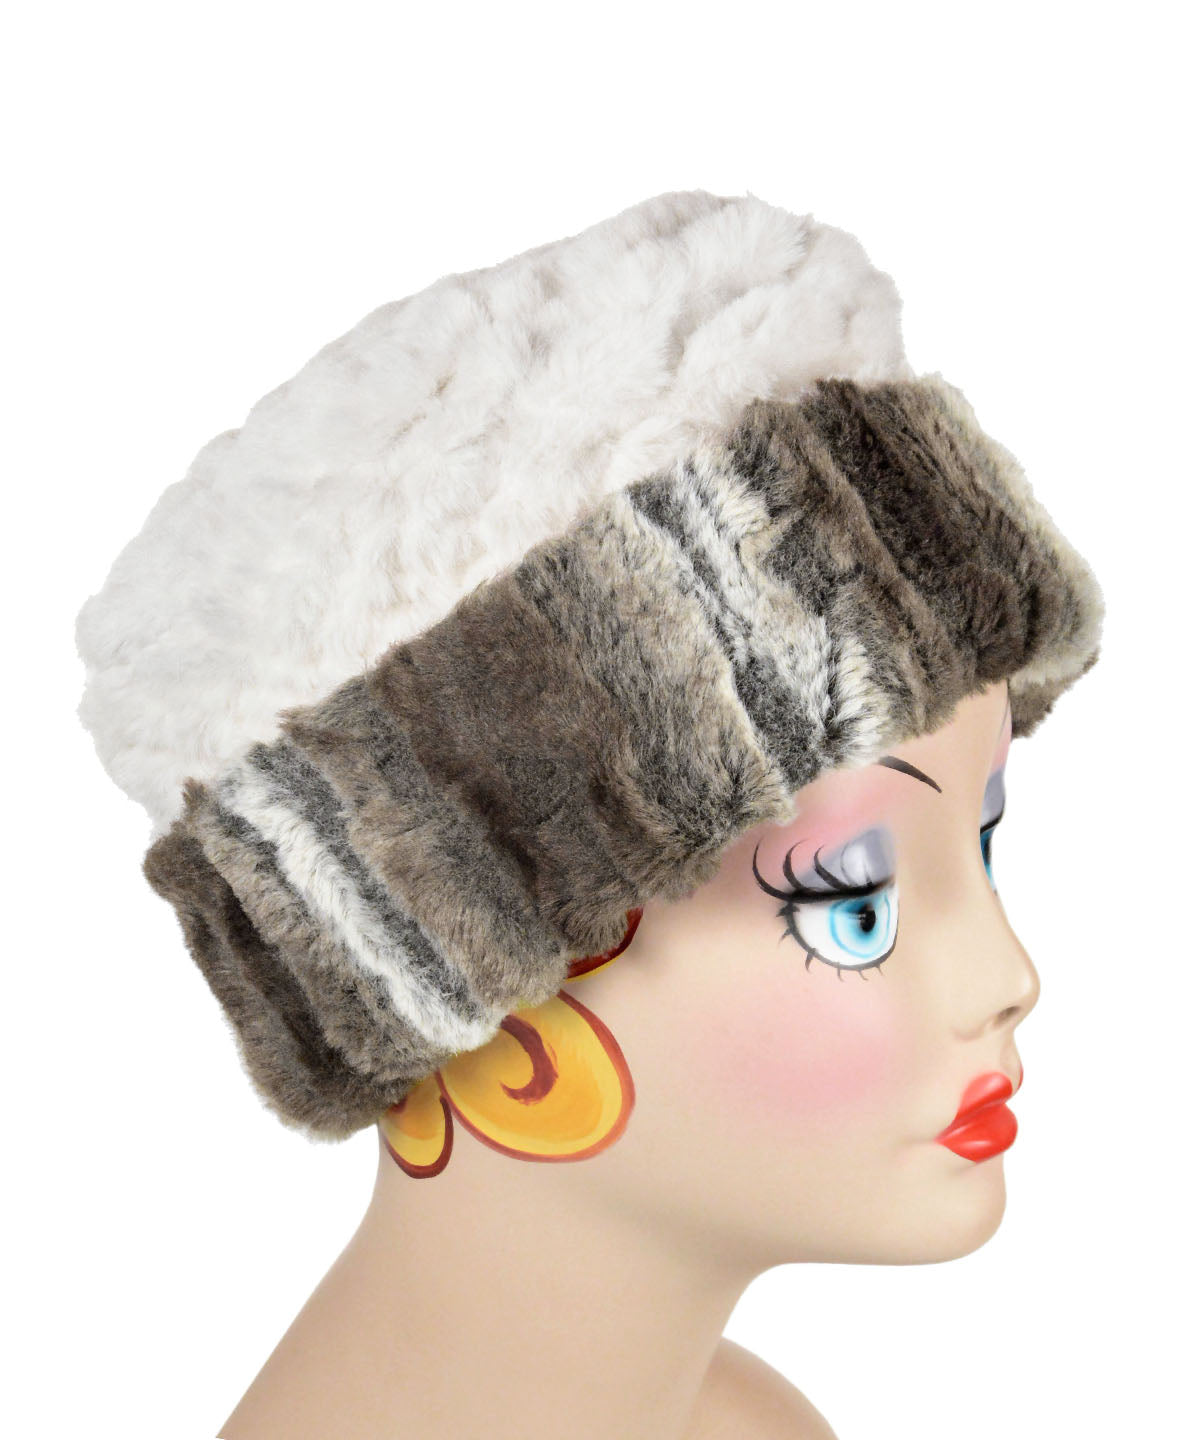 Cuffed Pillbox Hat, Reversible two tone Plush Faux Fur in Willows Grove Lined with Plush Fur in Falkor by Pandemonium Millinery. Shown with lining side out.. Made in Seattle, WA USA.